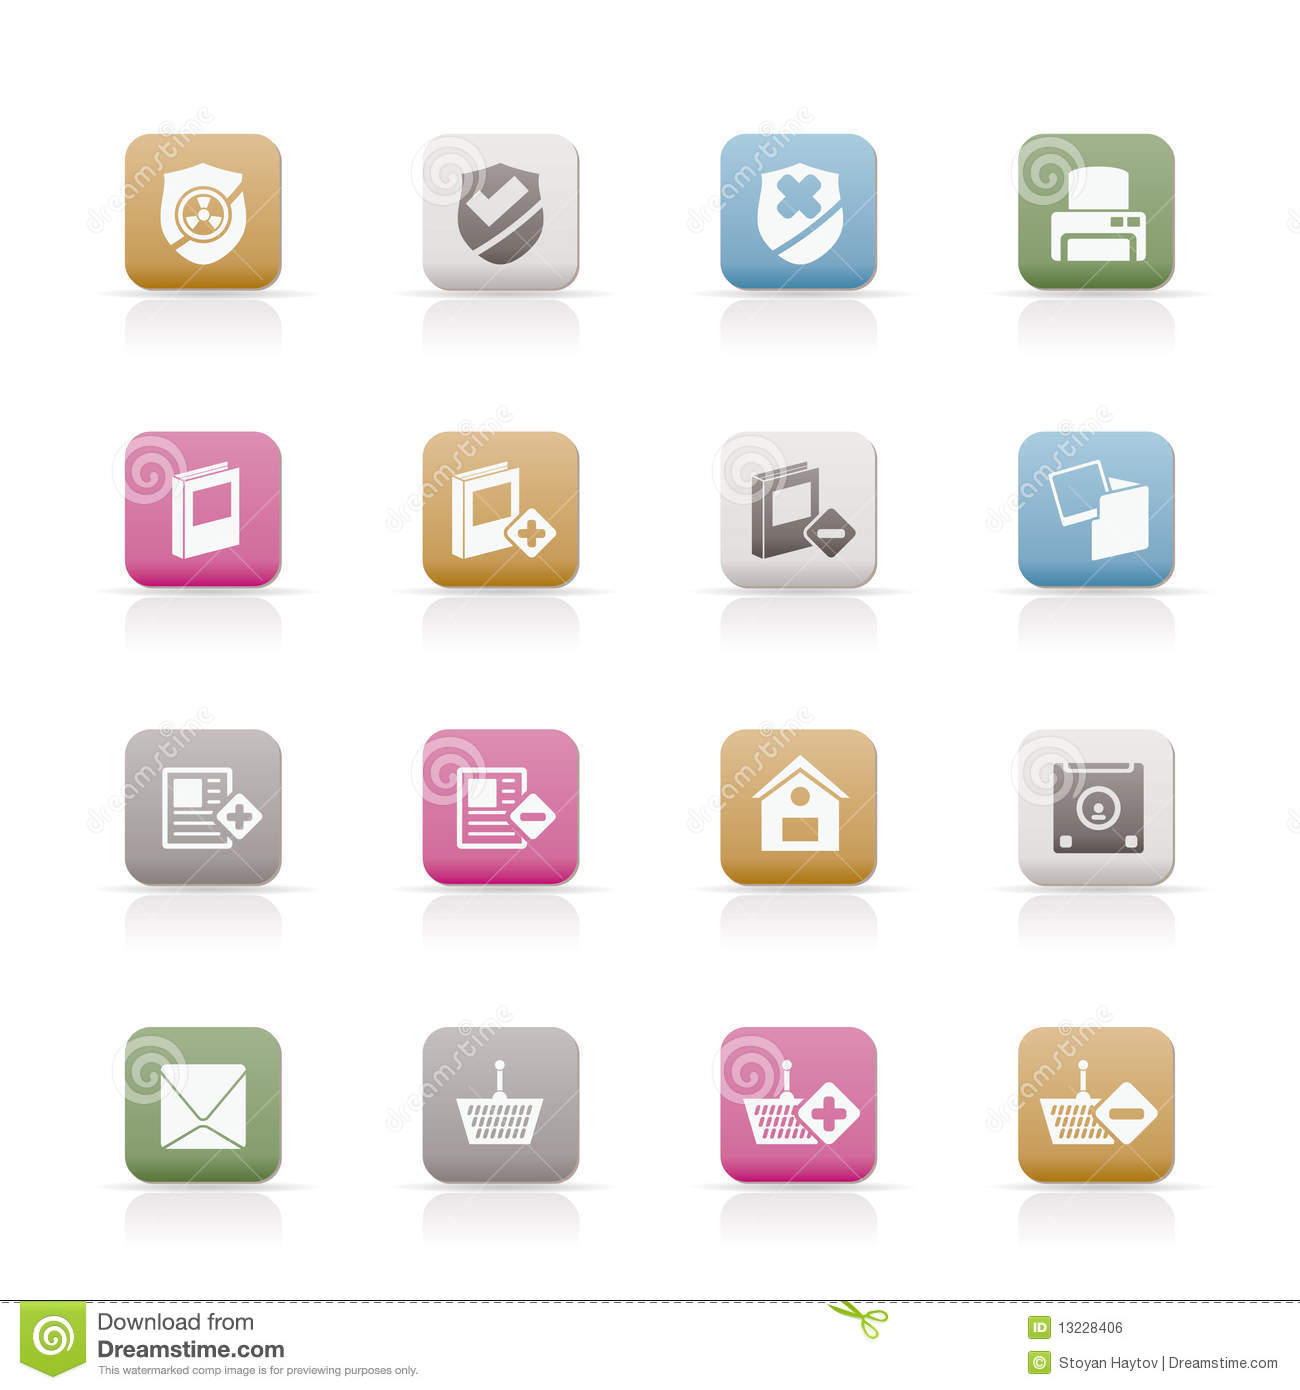 Free Website Icons and Buttons